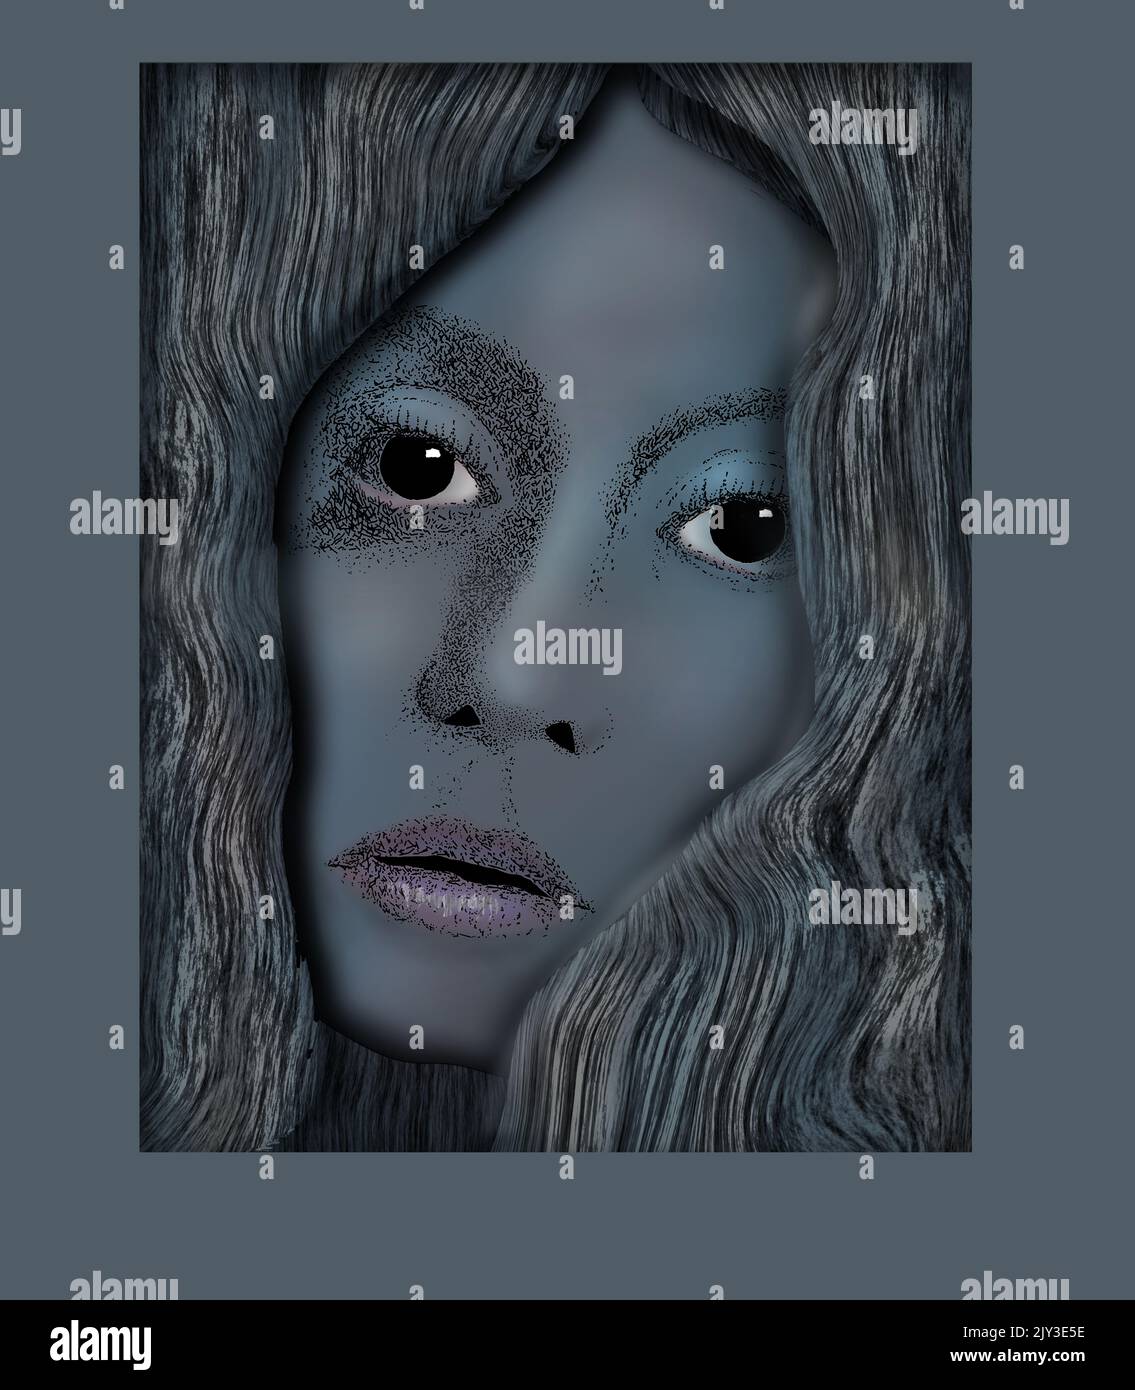 AN attractive young female woman’s face is seen in muted tones inside a skewed mat in a frame in this 3-d illustration. Stock Photo